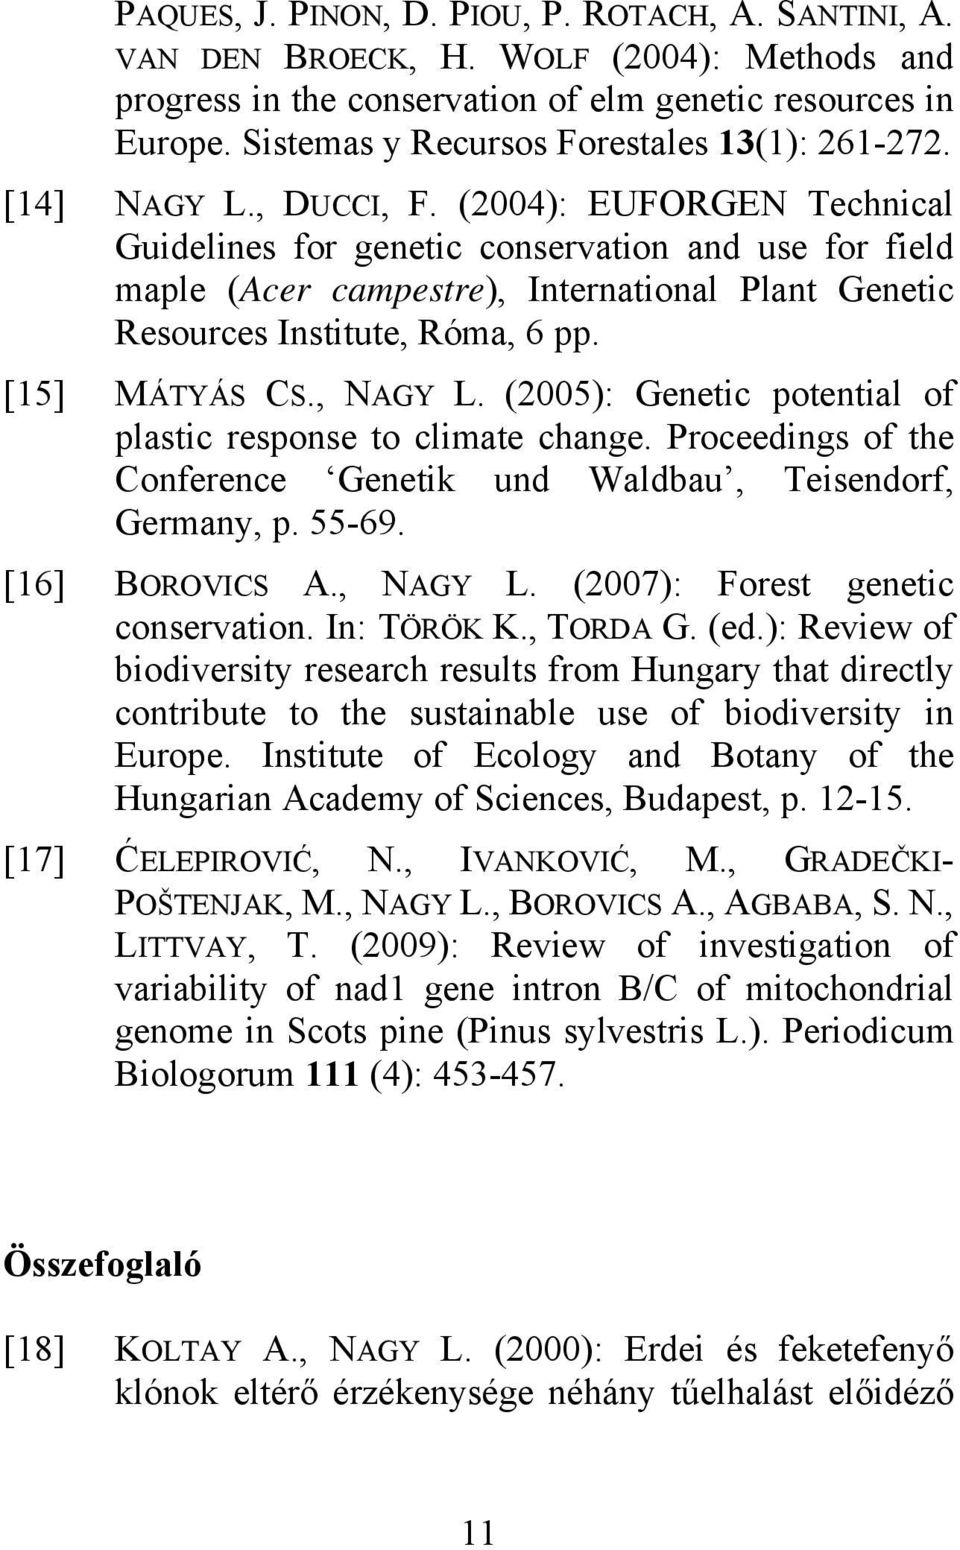 (2004): EUFORGEN Technical Guidelines for genetic conservation and use for field maple (Acer campestre), International Plant Genetic Resources Institute, Róma, 6 pp. [15] MÁTYÁS CS., NAGY L.